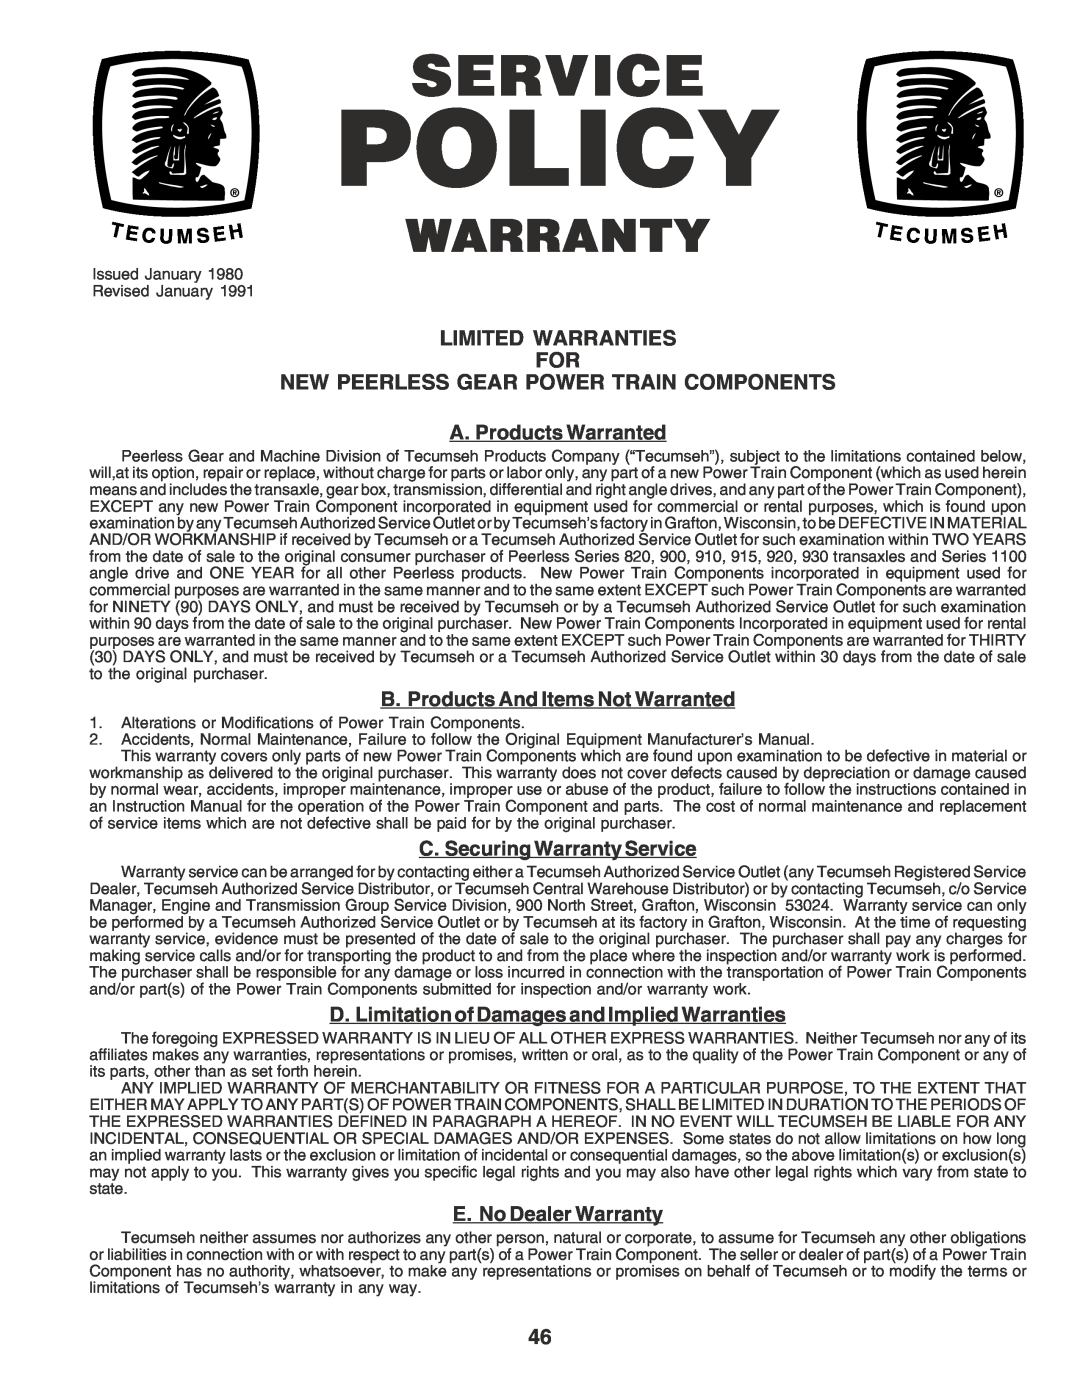 Poulan PR1842STA owner manual Limited Warranties For New Peerless Gear Power Train Components, Policy 